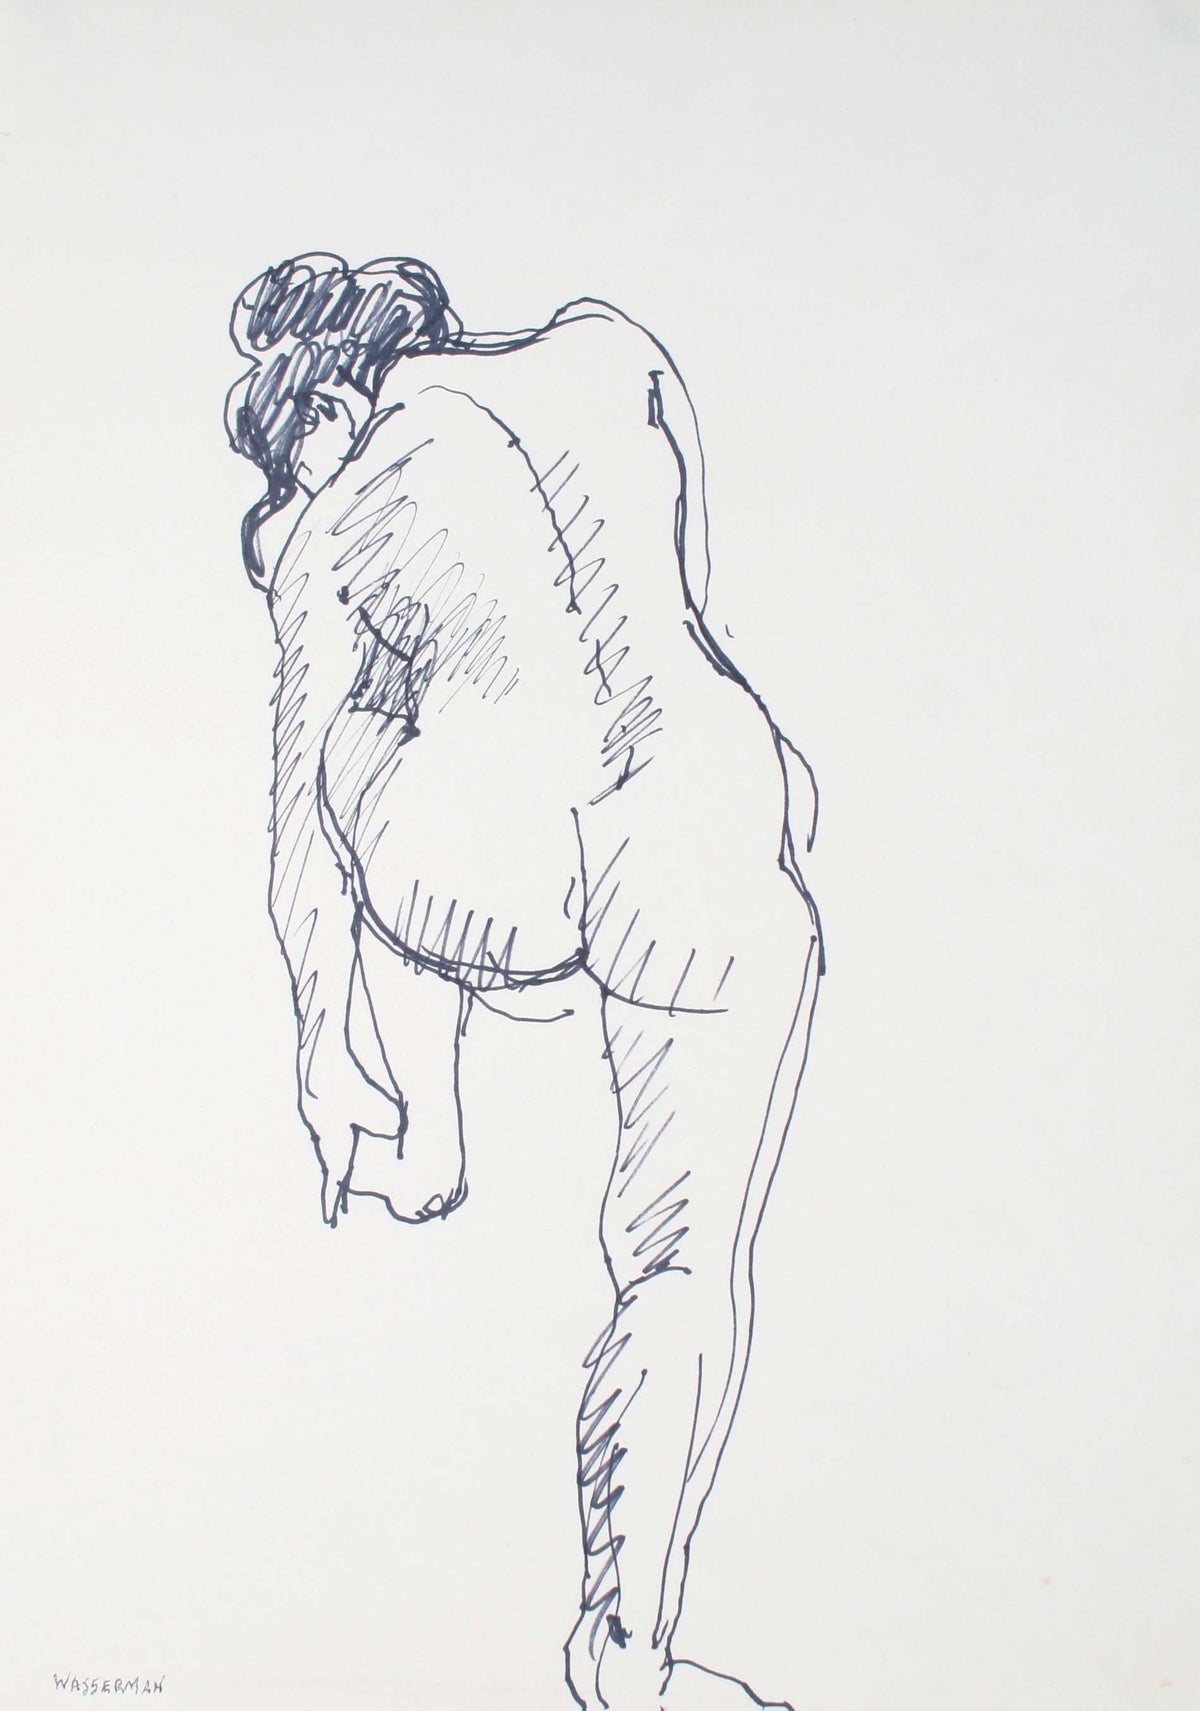 Crouched Female Nude&lt;br&gt;Mid-Late 20th Century Ink on Paper&lt;br&gt;&lt;br&gt;#72093